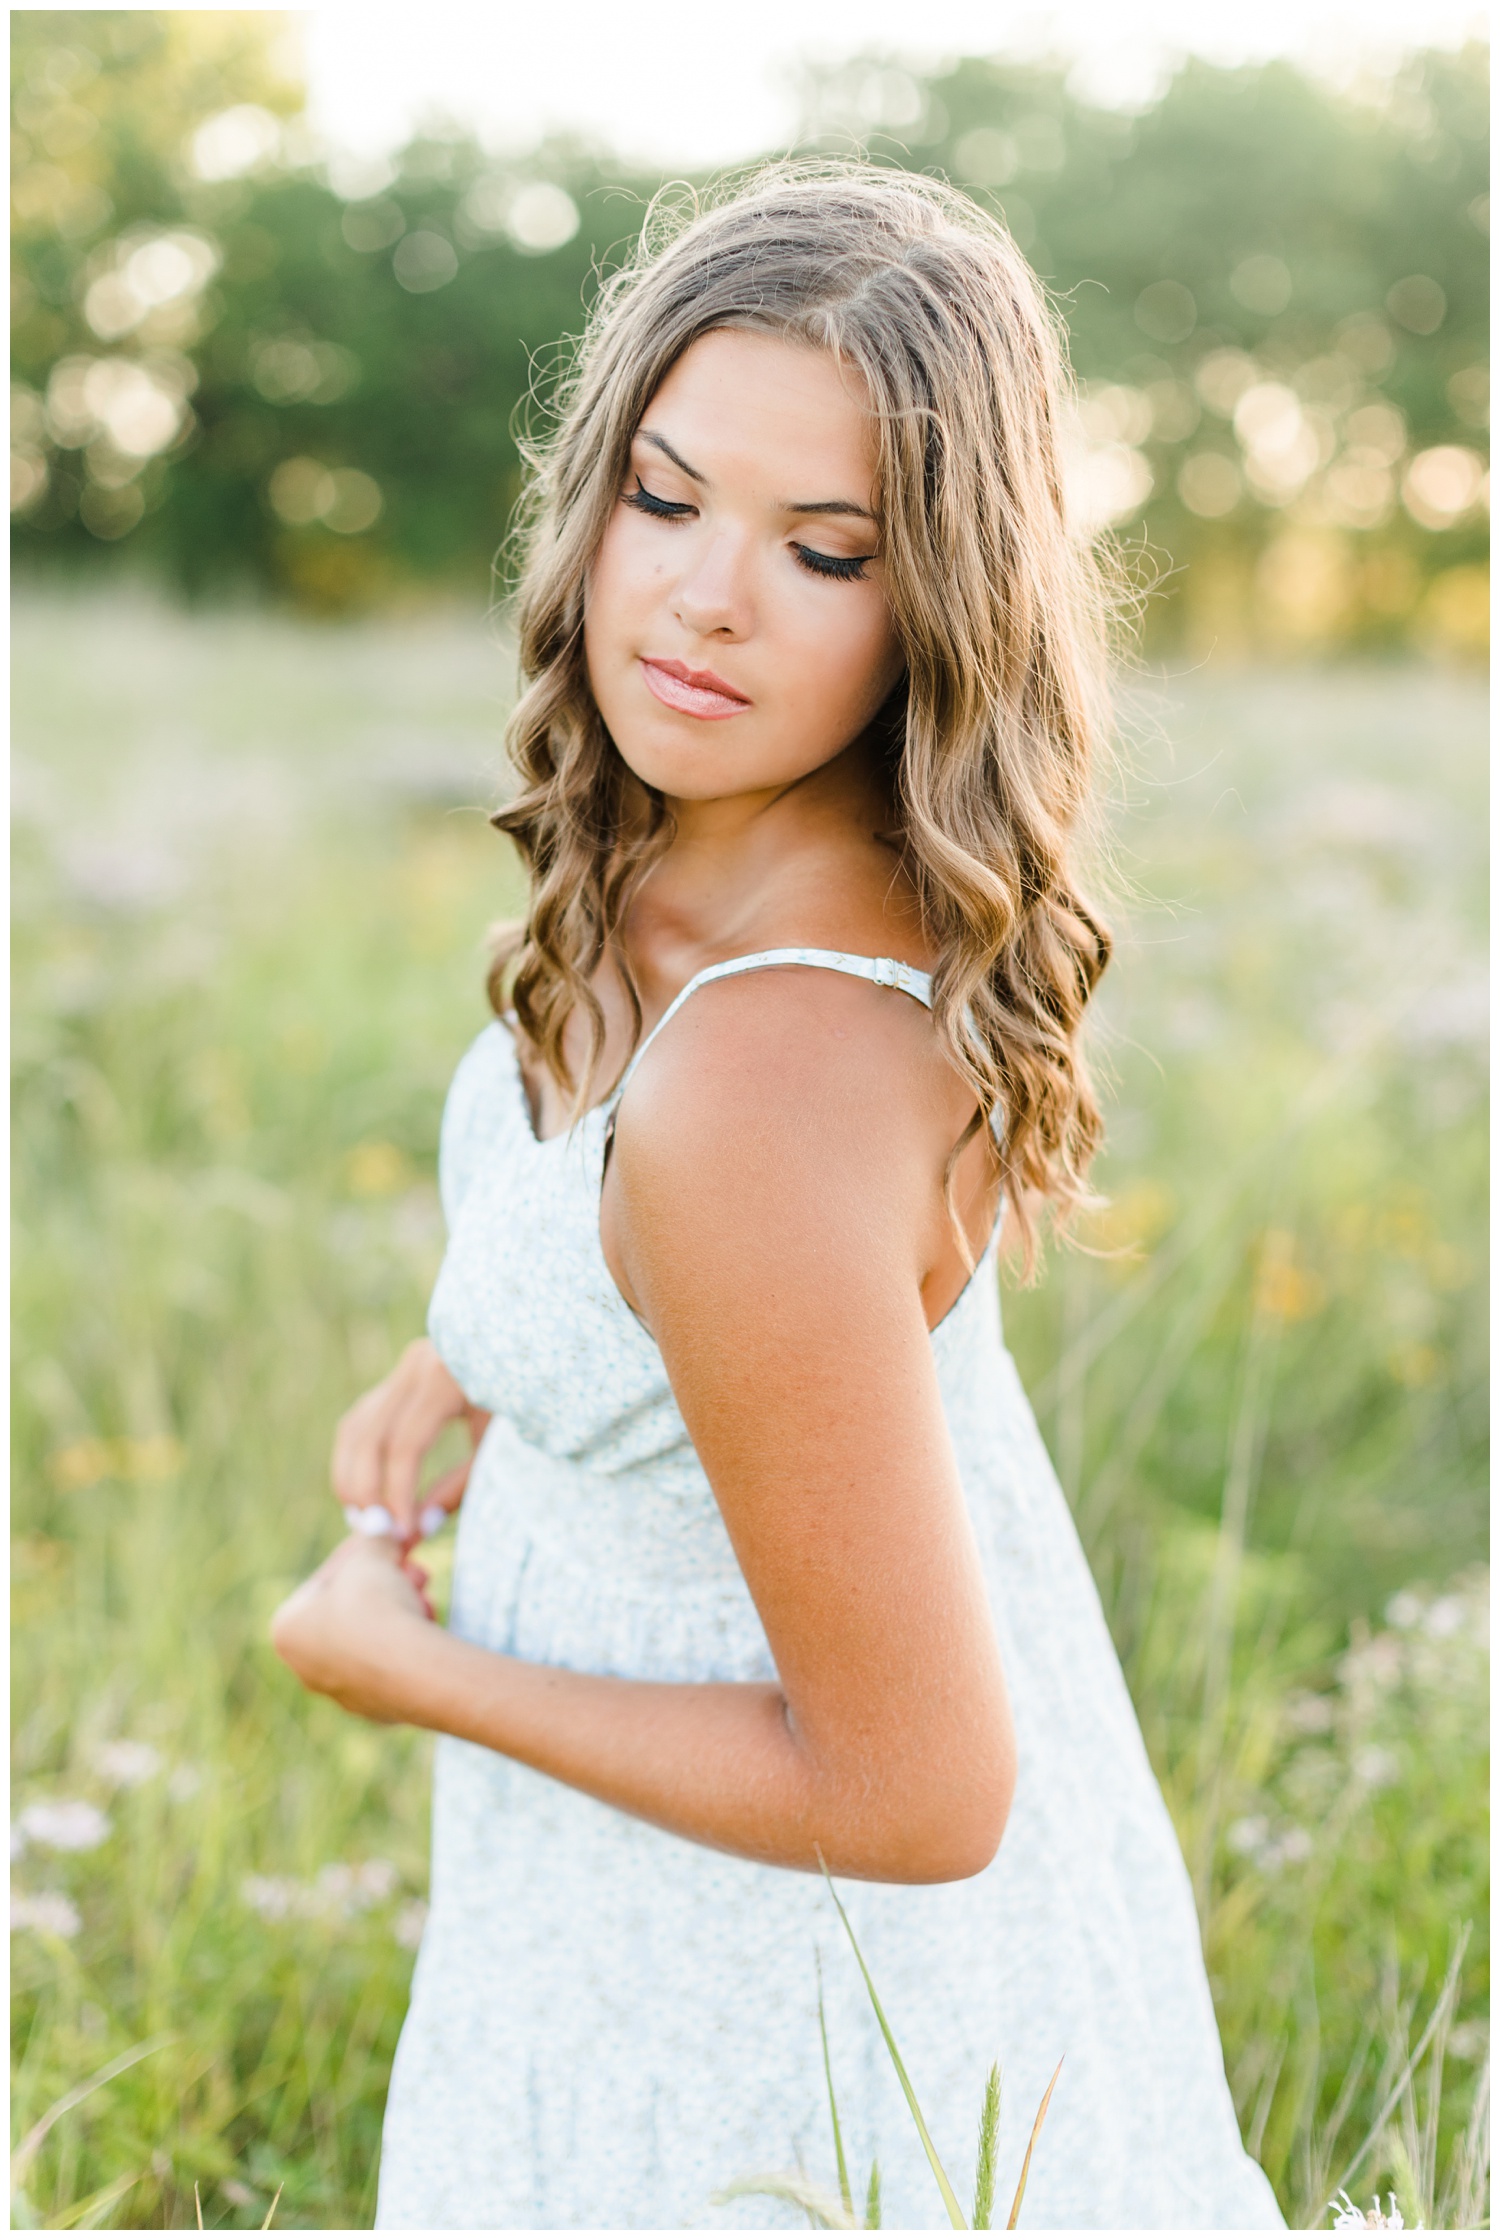 Analia gracefully looks over her shoulder in the middle of a wildflower field in Iowa | CB Studio